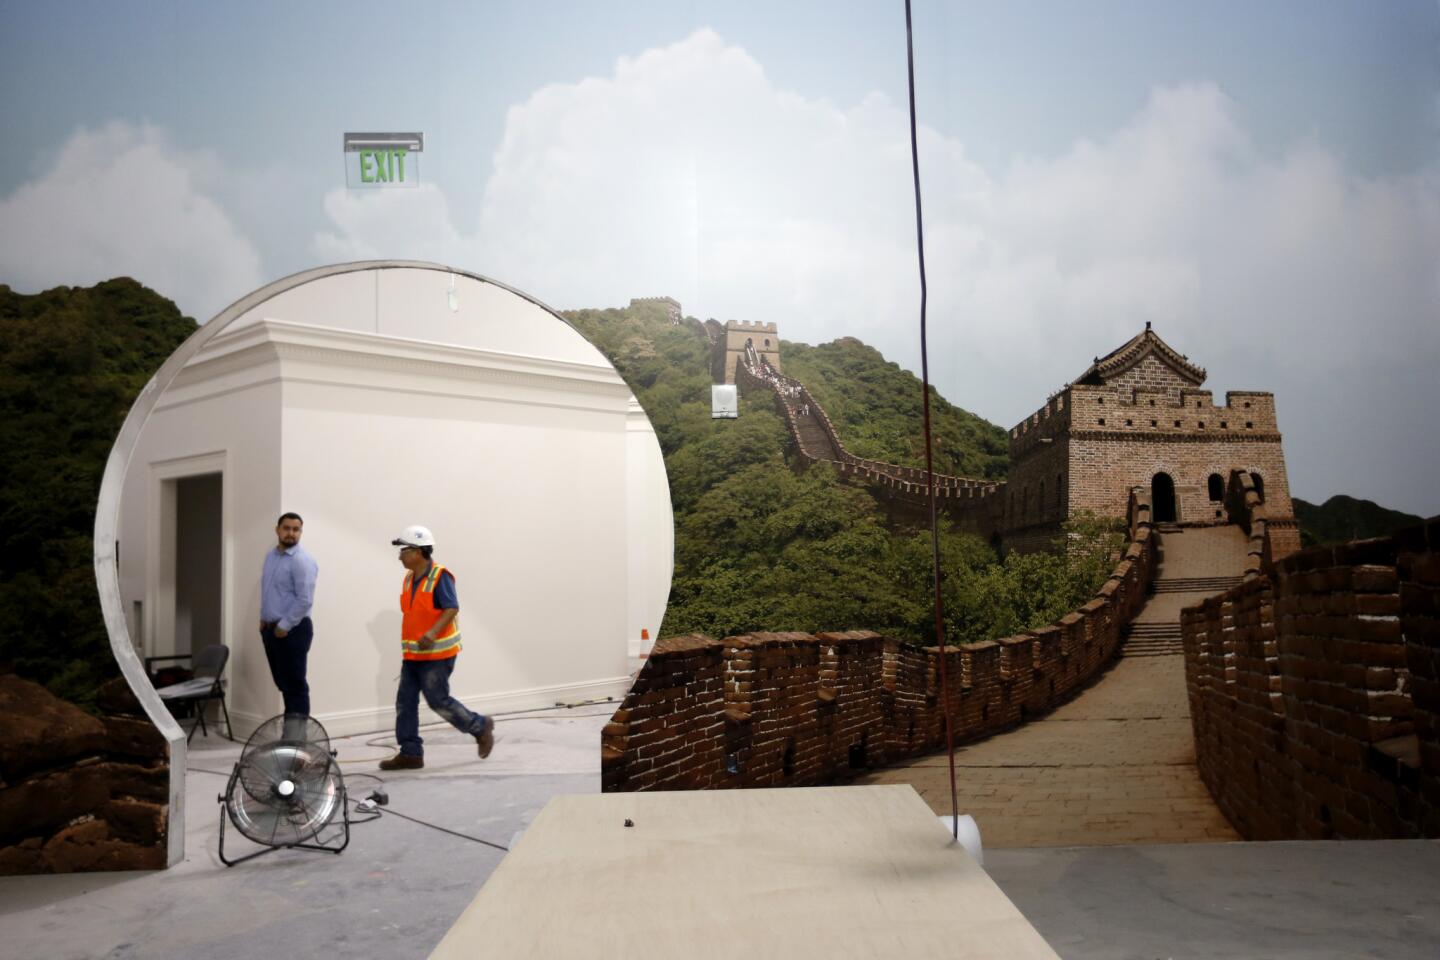 A depiction of the Great Wall of China commemorates President Richard Nixon's visit to China. The venue in Yorba Linda is scheduled to open to the public in October after a $15-million renovation and will feature nearly 70 new major exhibits.